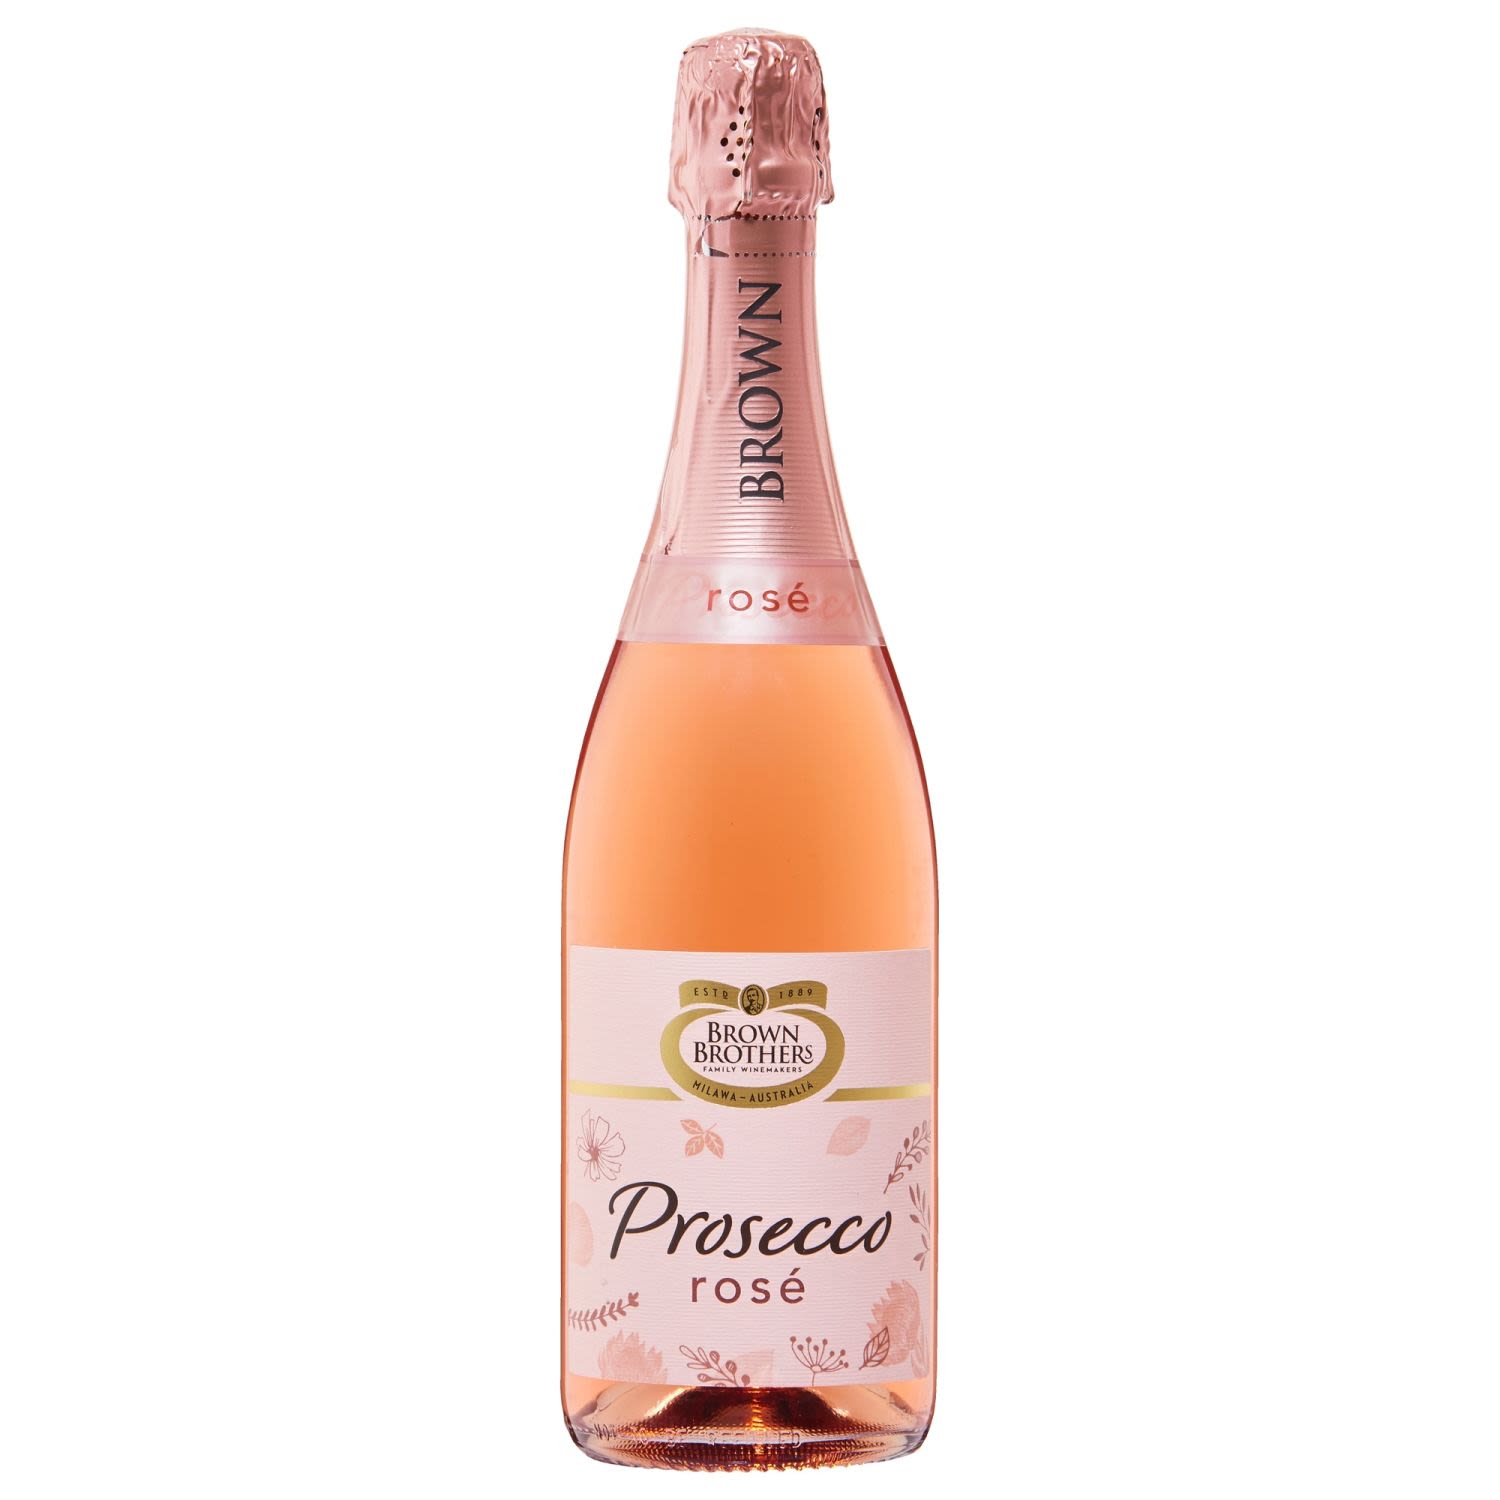 Brown Brothers Prosecco Rose NV 750mL Bottle